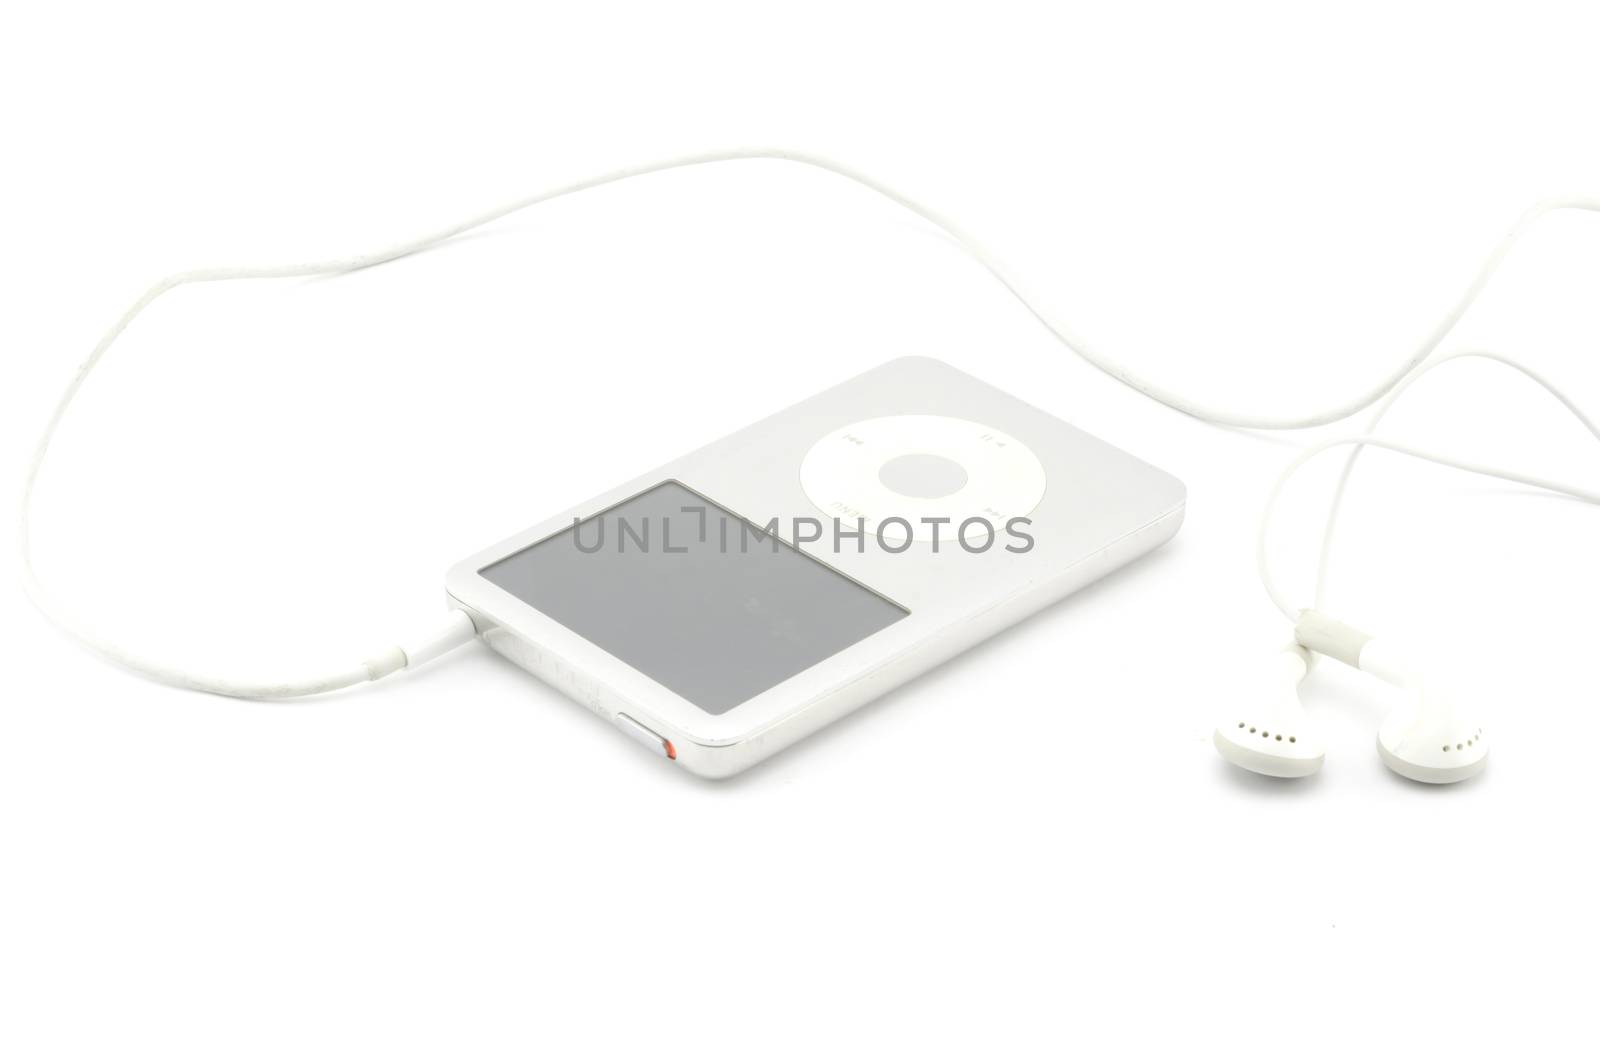 mp3 player with earphone isolated on white background